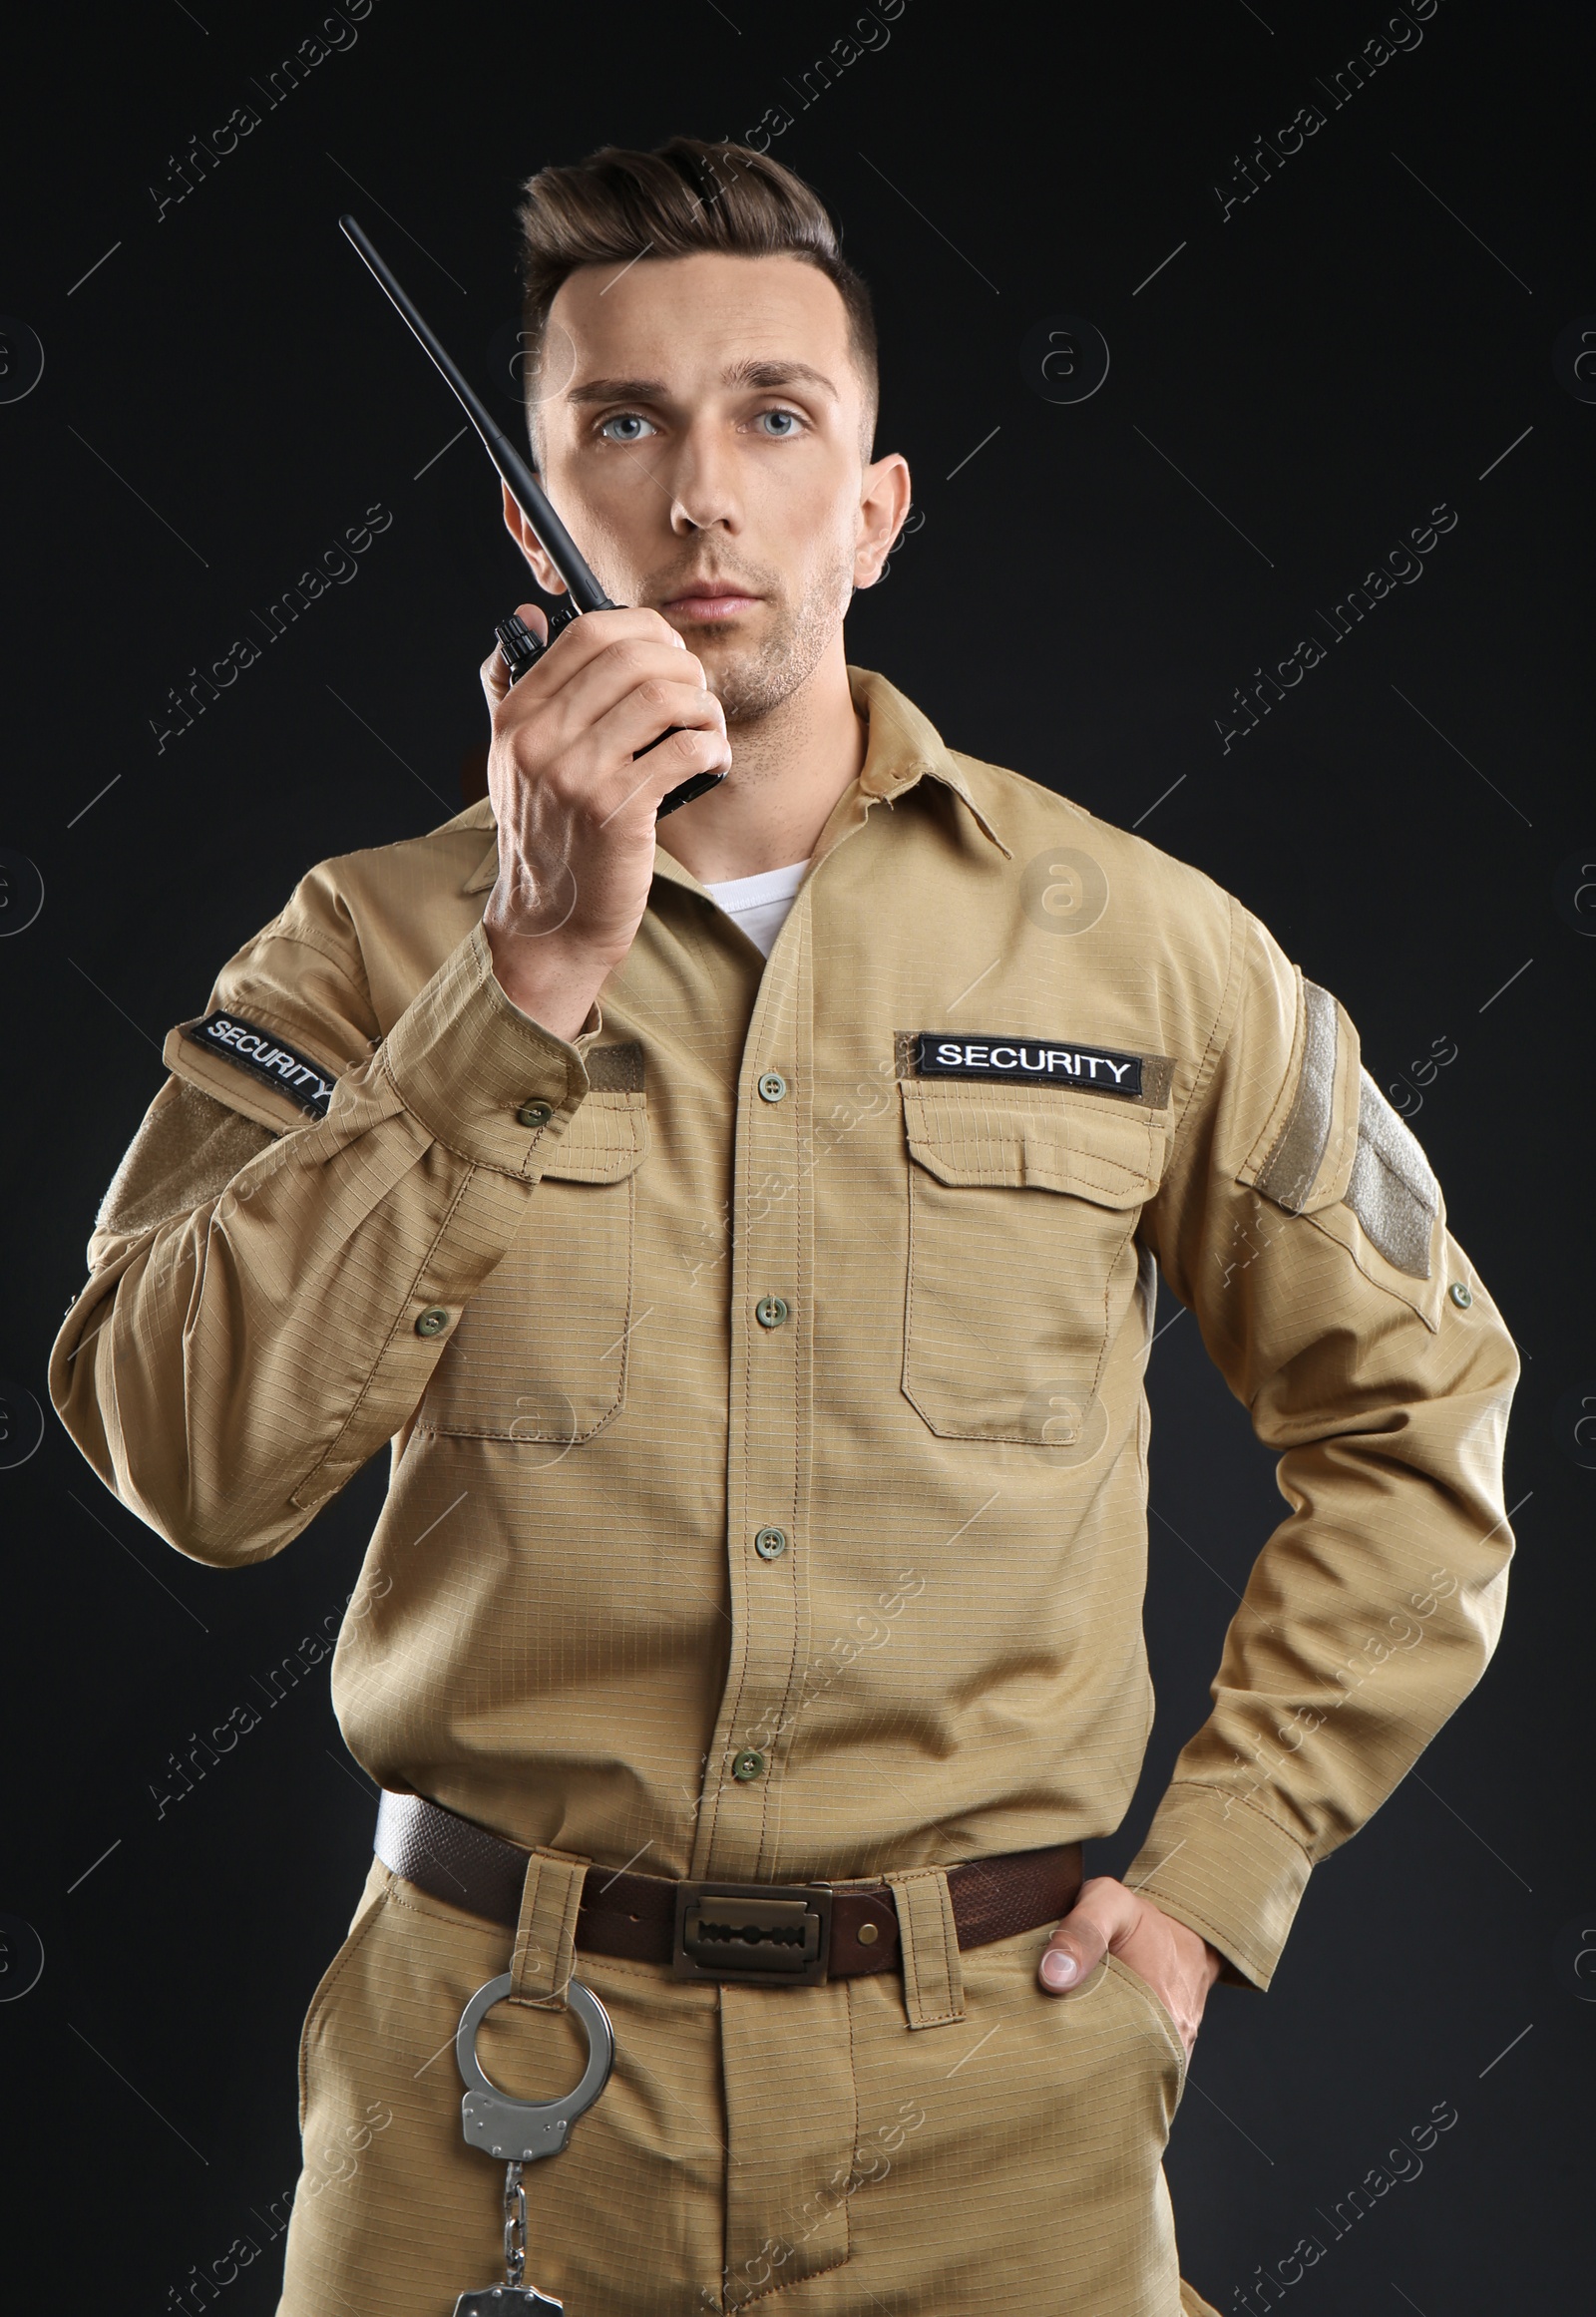 Photo of Male security guard using portable radio transmitter on dark background